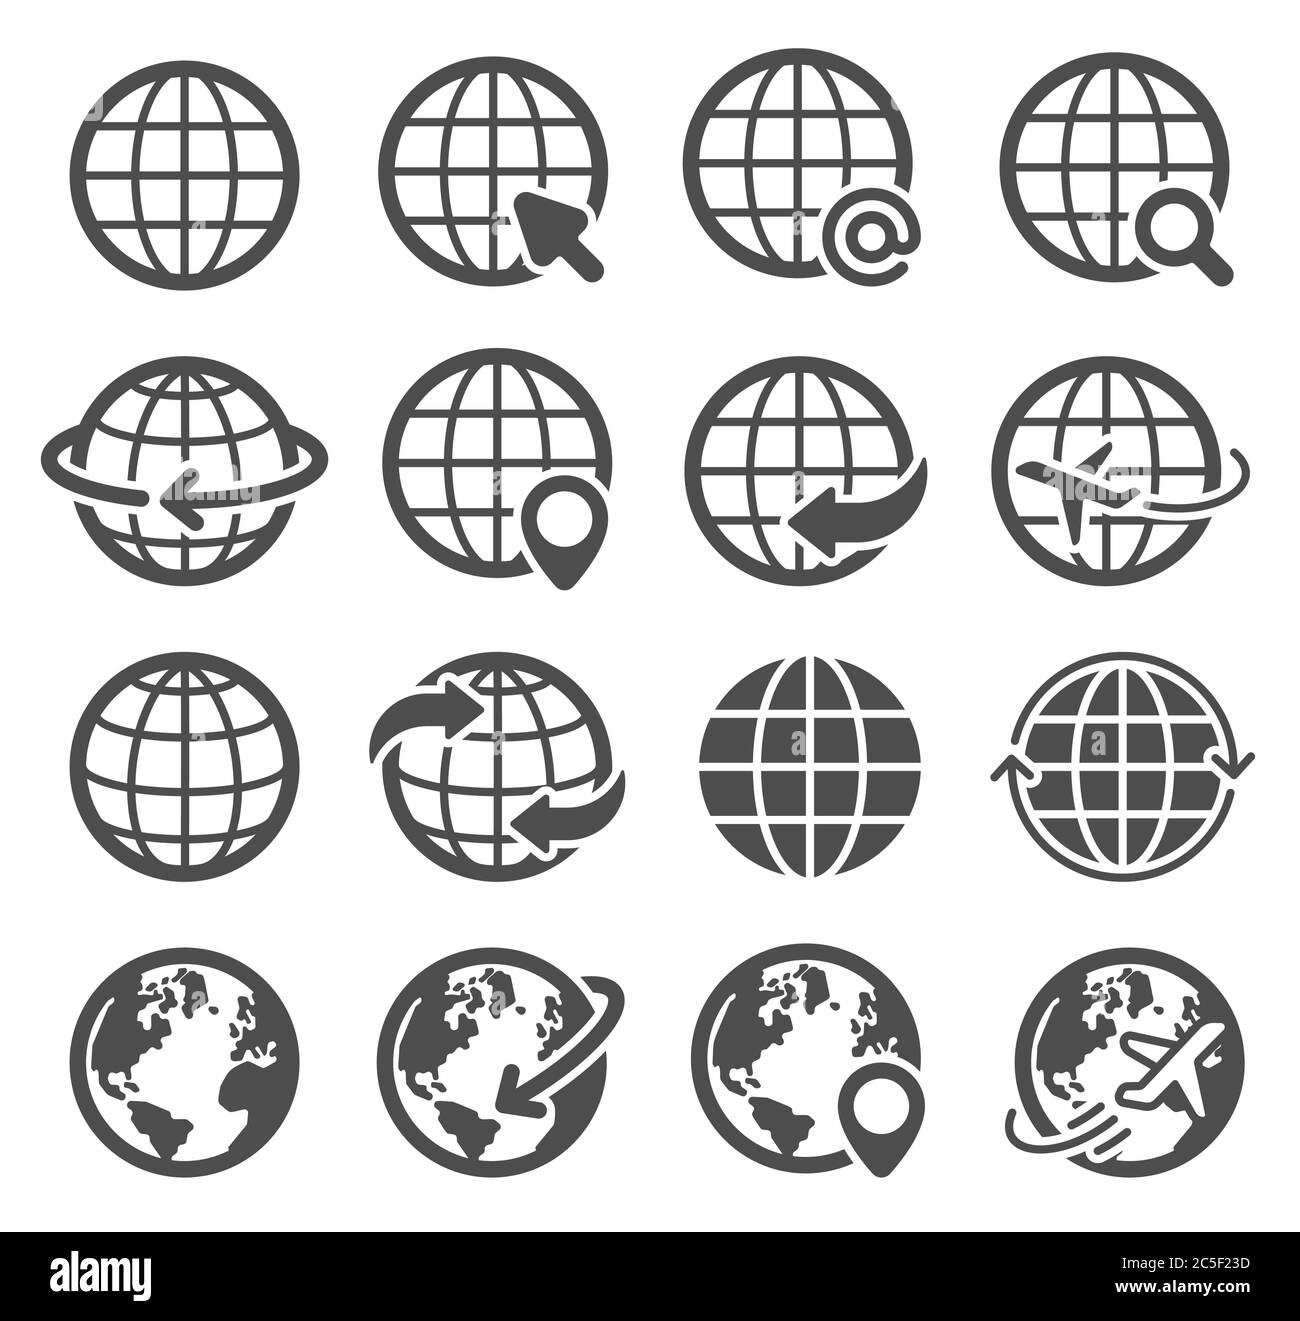 Globe icons set. World earth, worldwide map continents spherical planet, internet global communication pictograms, geography vector symbols Stock Vector